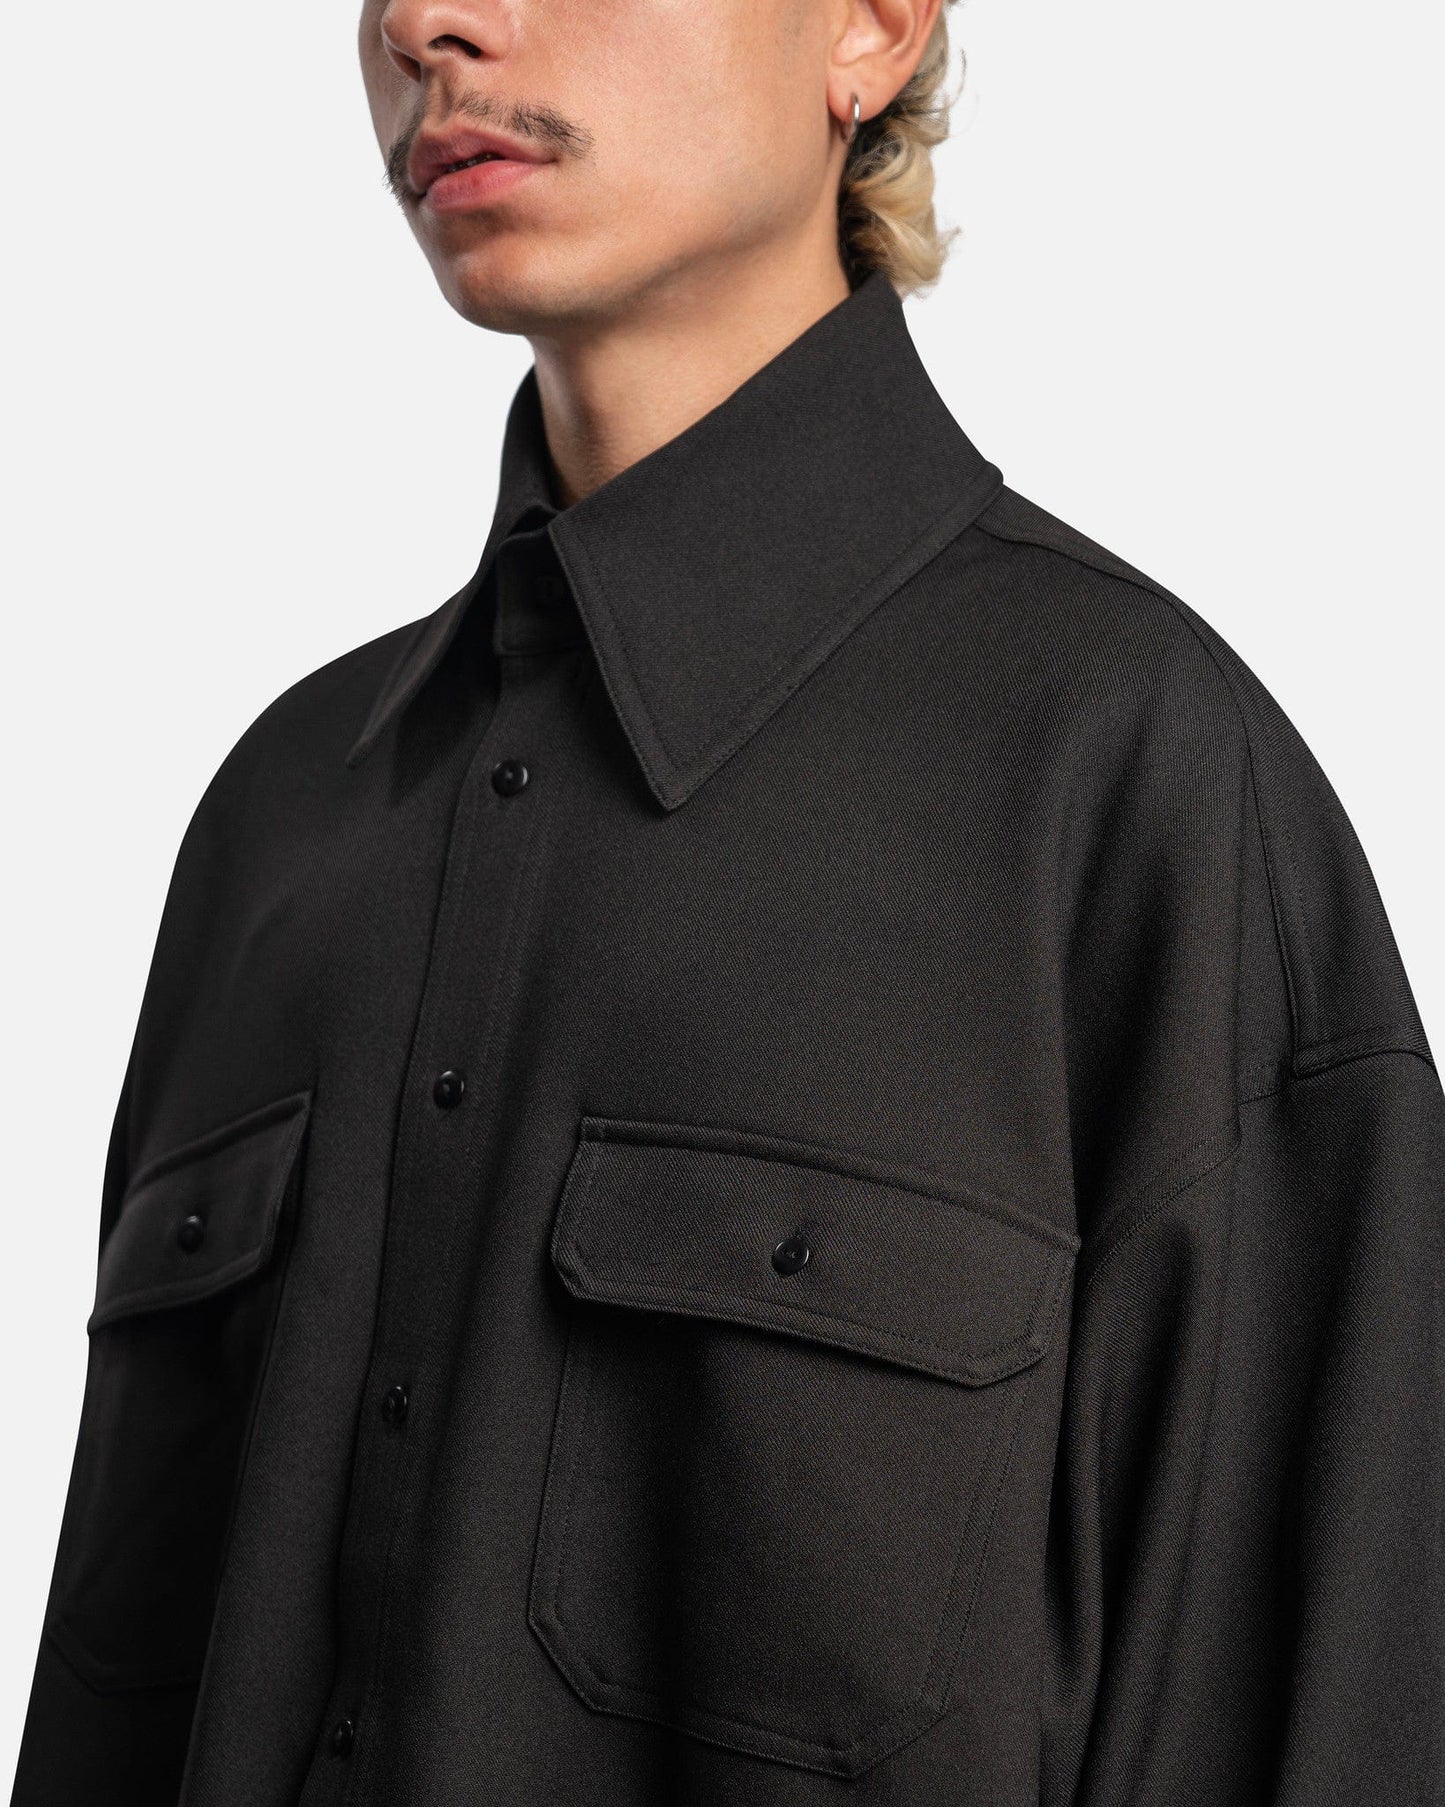 Willy Chavarria Men's Shirts Big Willy Long Sleeve Shirt in Black